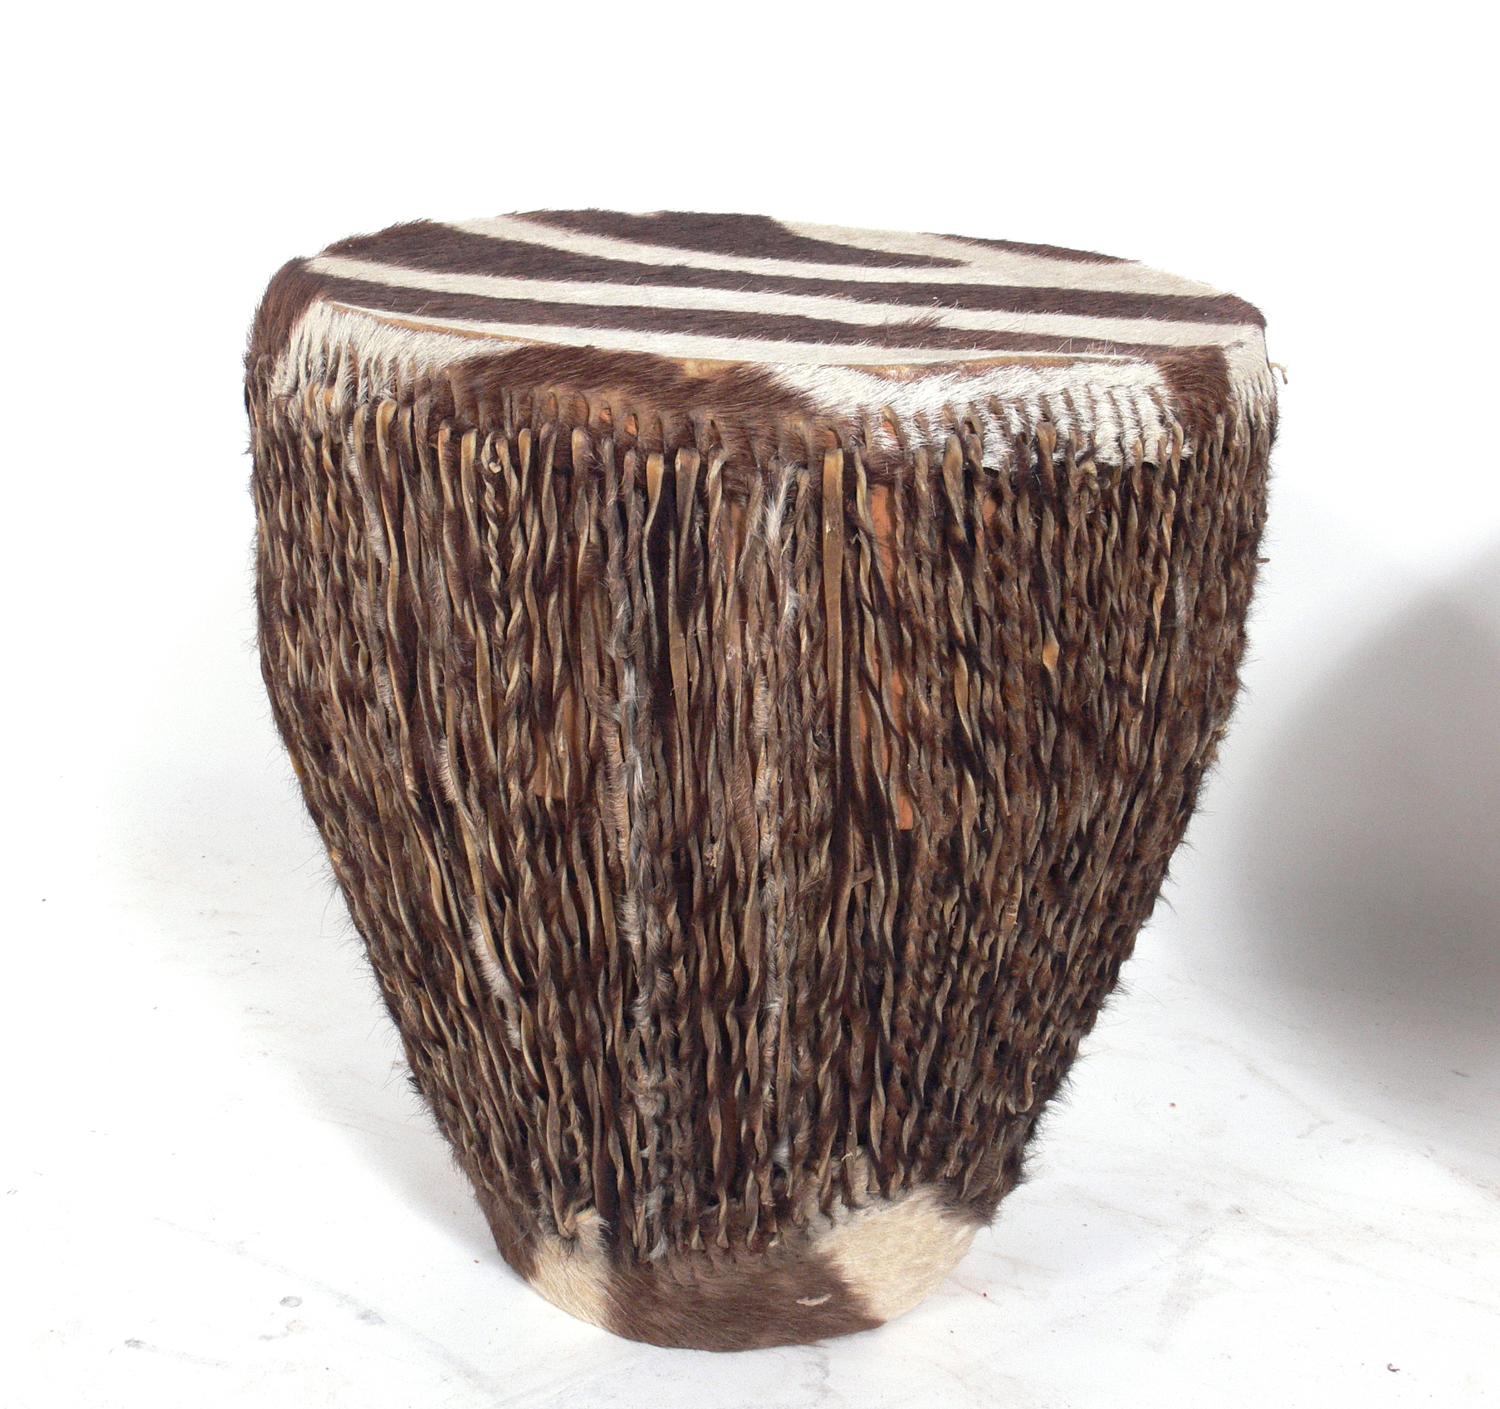 African zebra hide drum end tables, circa 1950s. They are each hand made and unique, and therefore vary slightly in size. From left to right, they measure 13.5